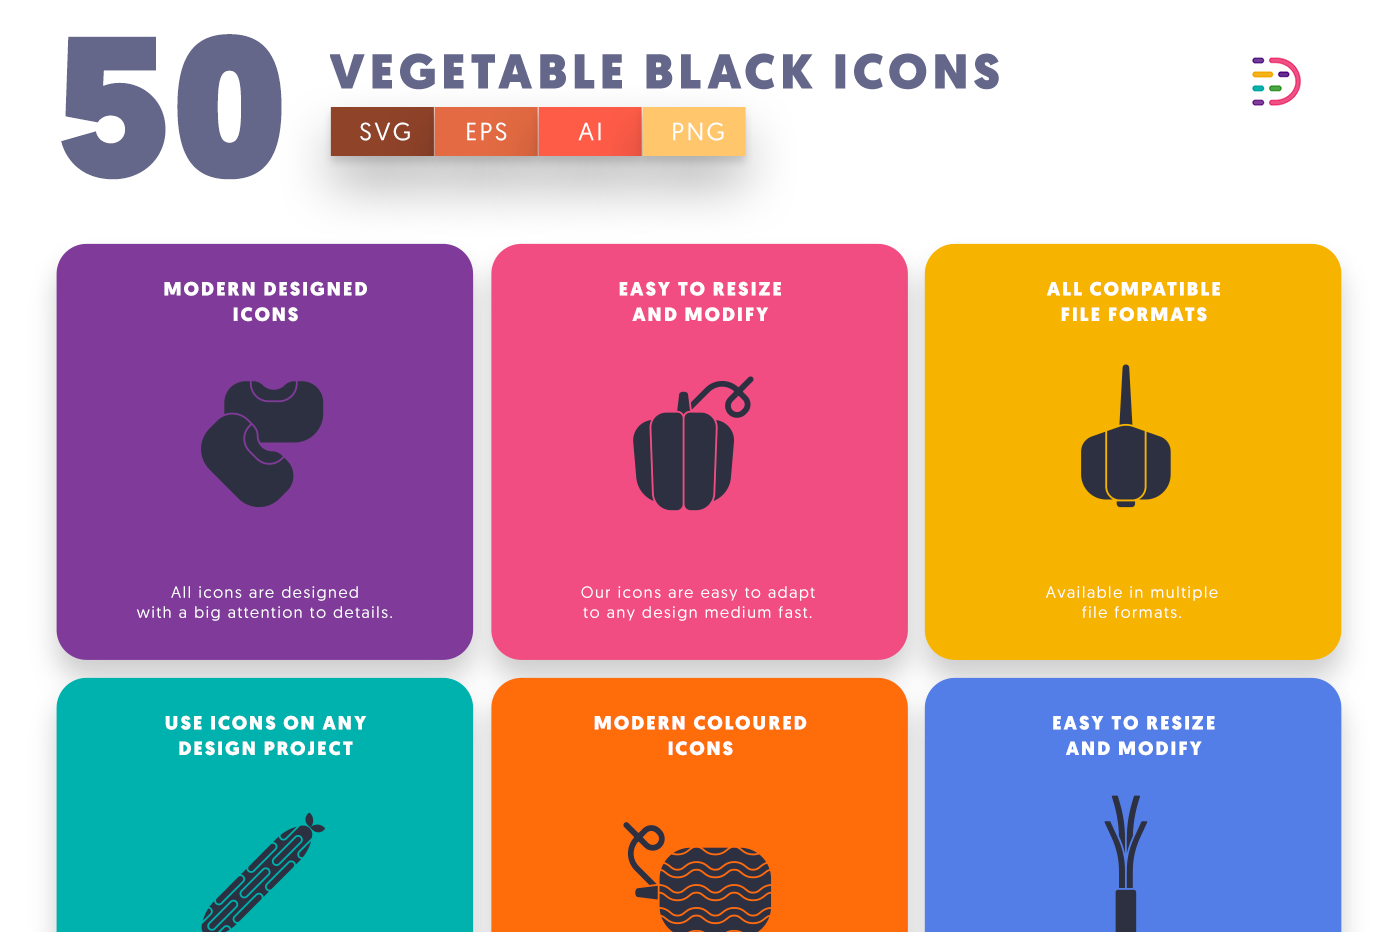 50 Vegetable Black Icons with colored backgrounds 